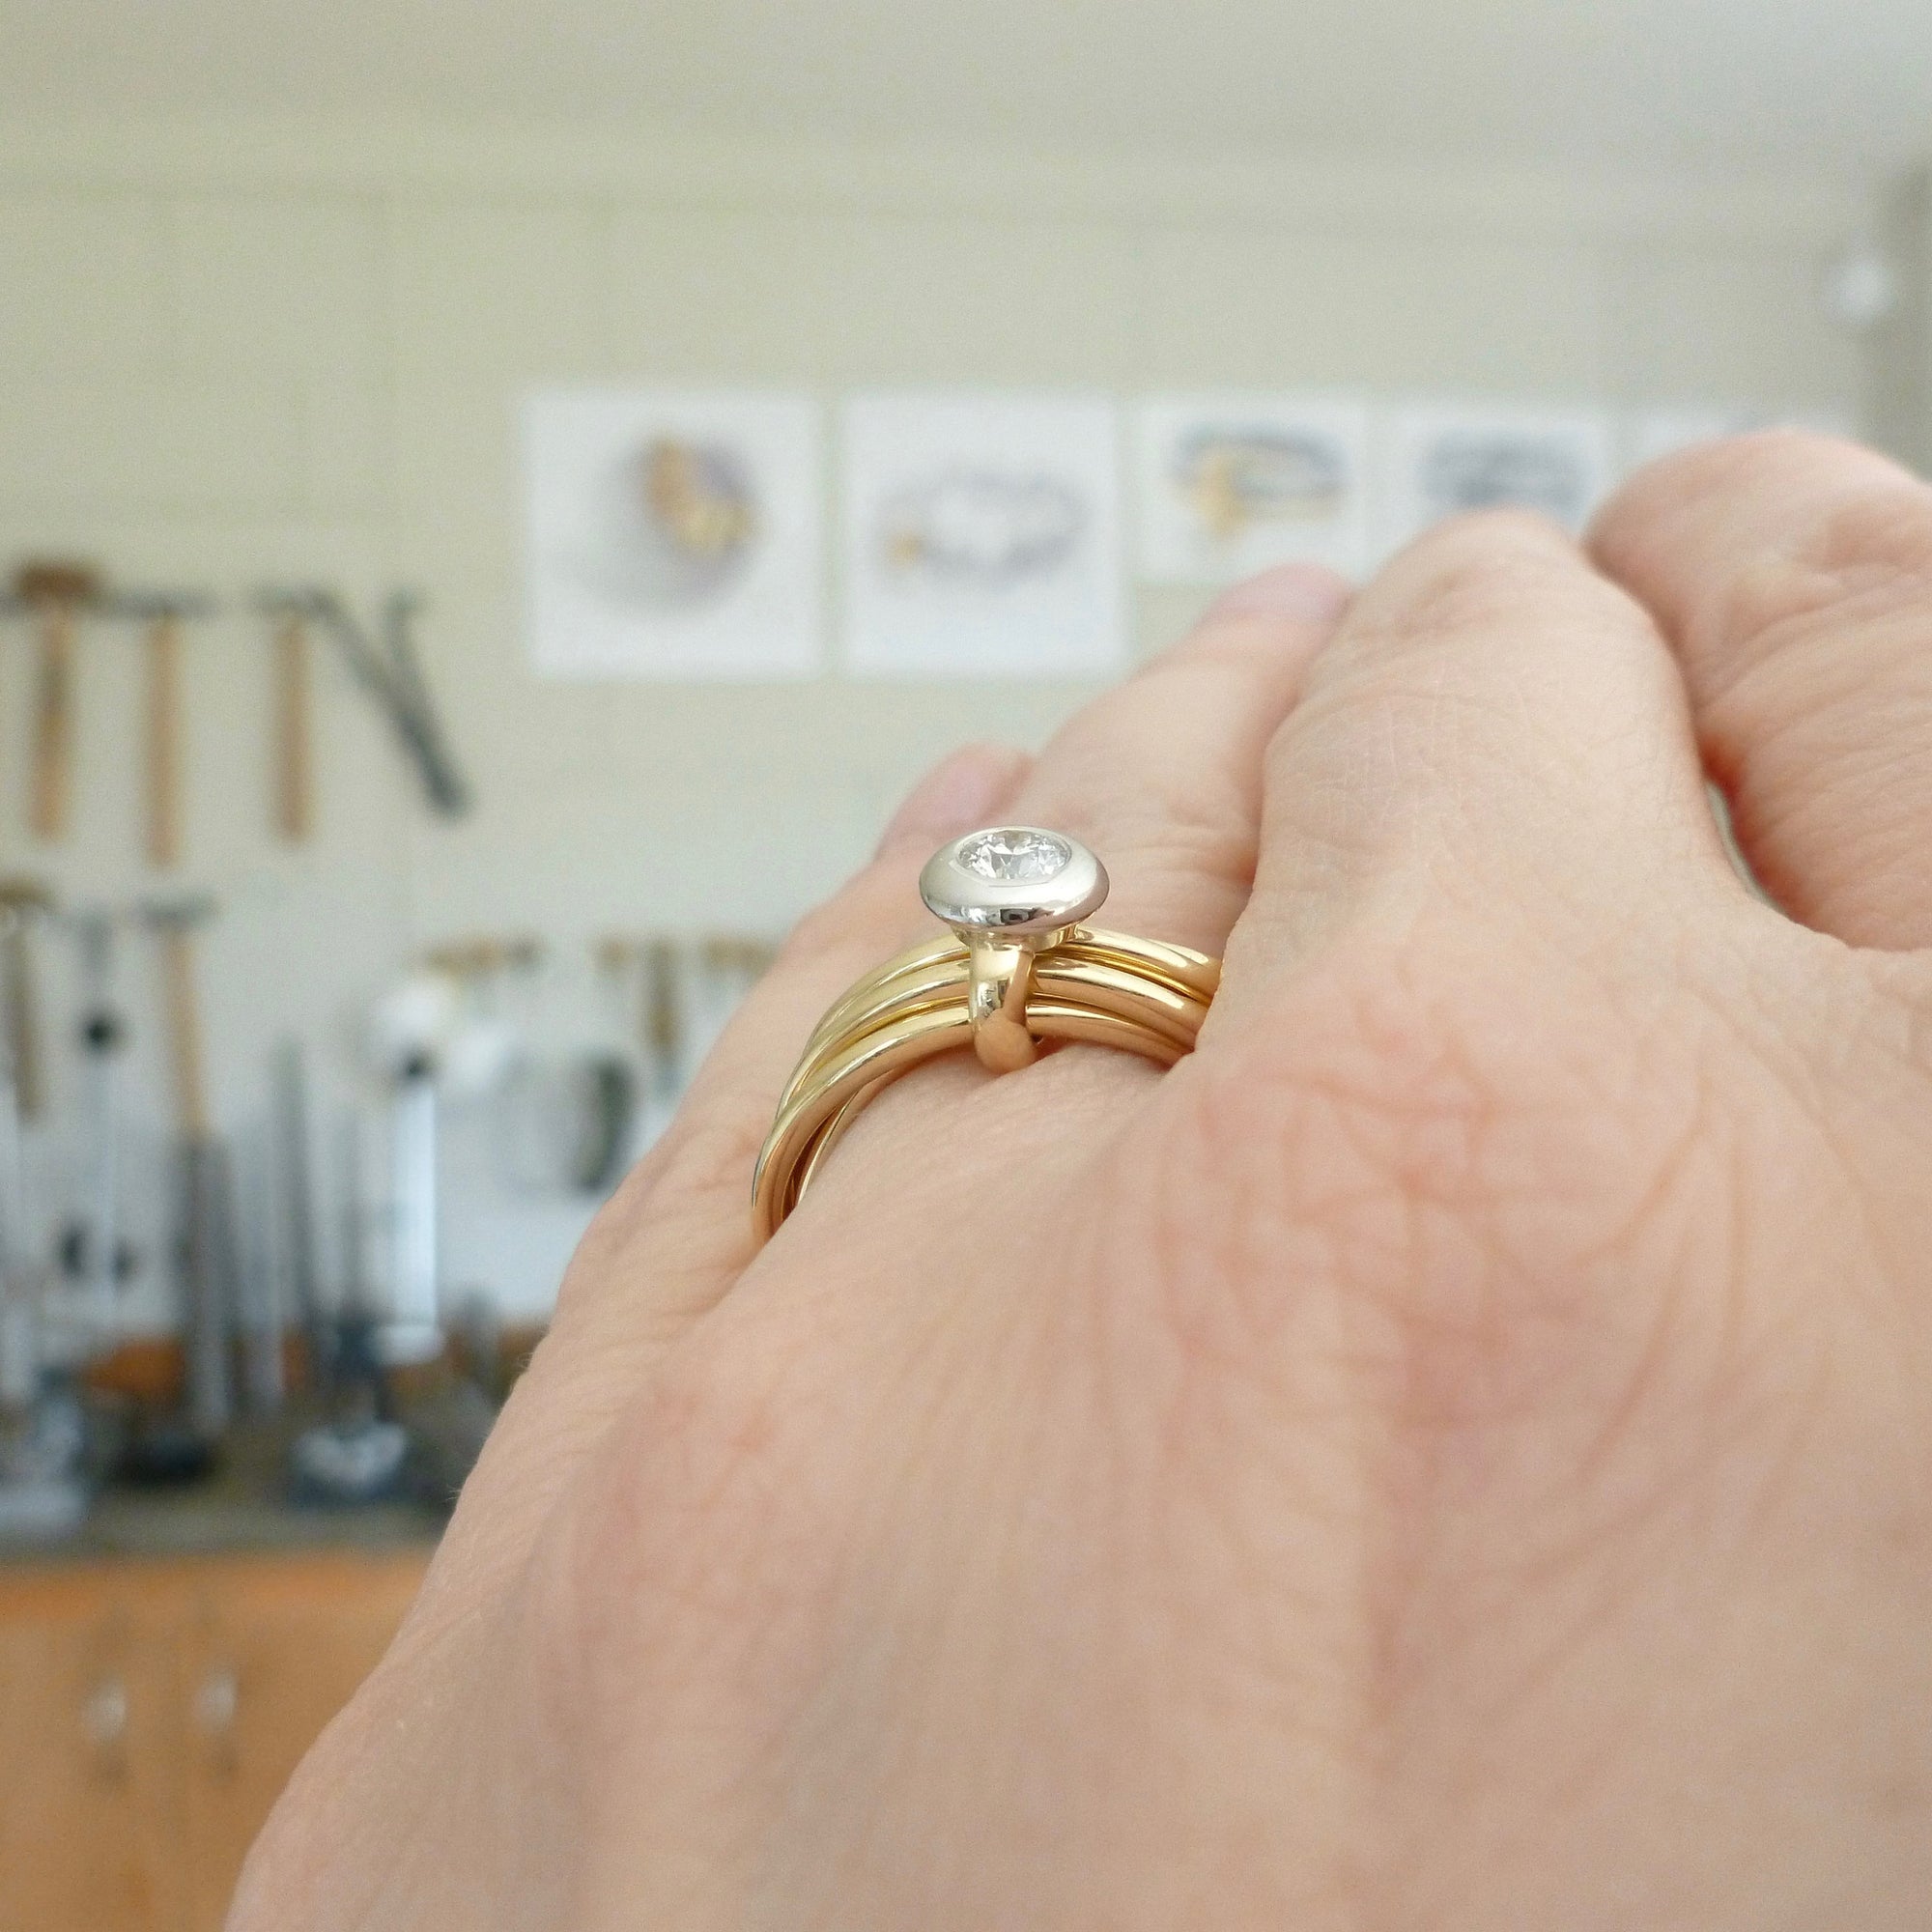 bespoke gold and diamond wedding and engagement ring in one. Multi band ring or interlocking ring.